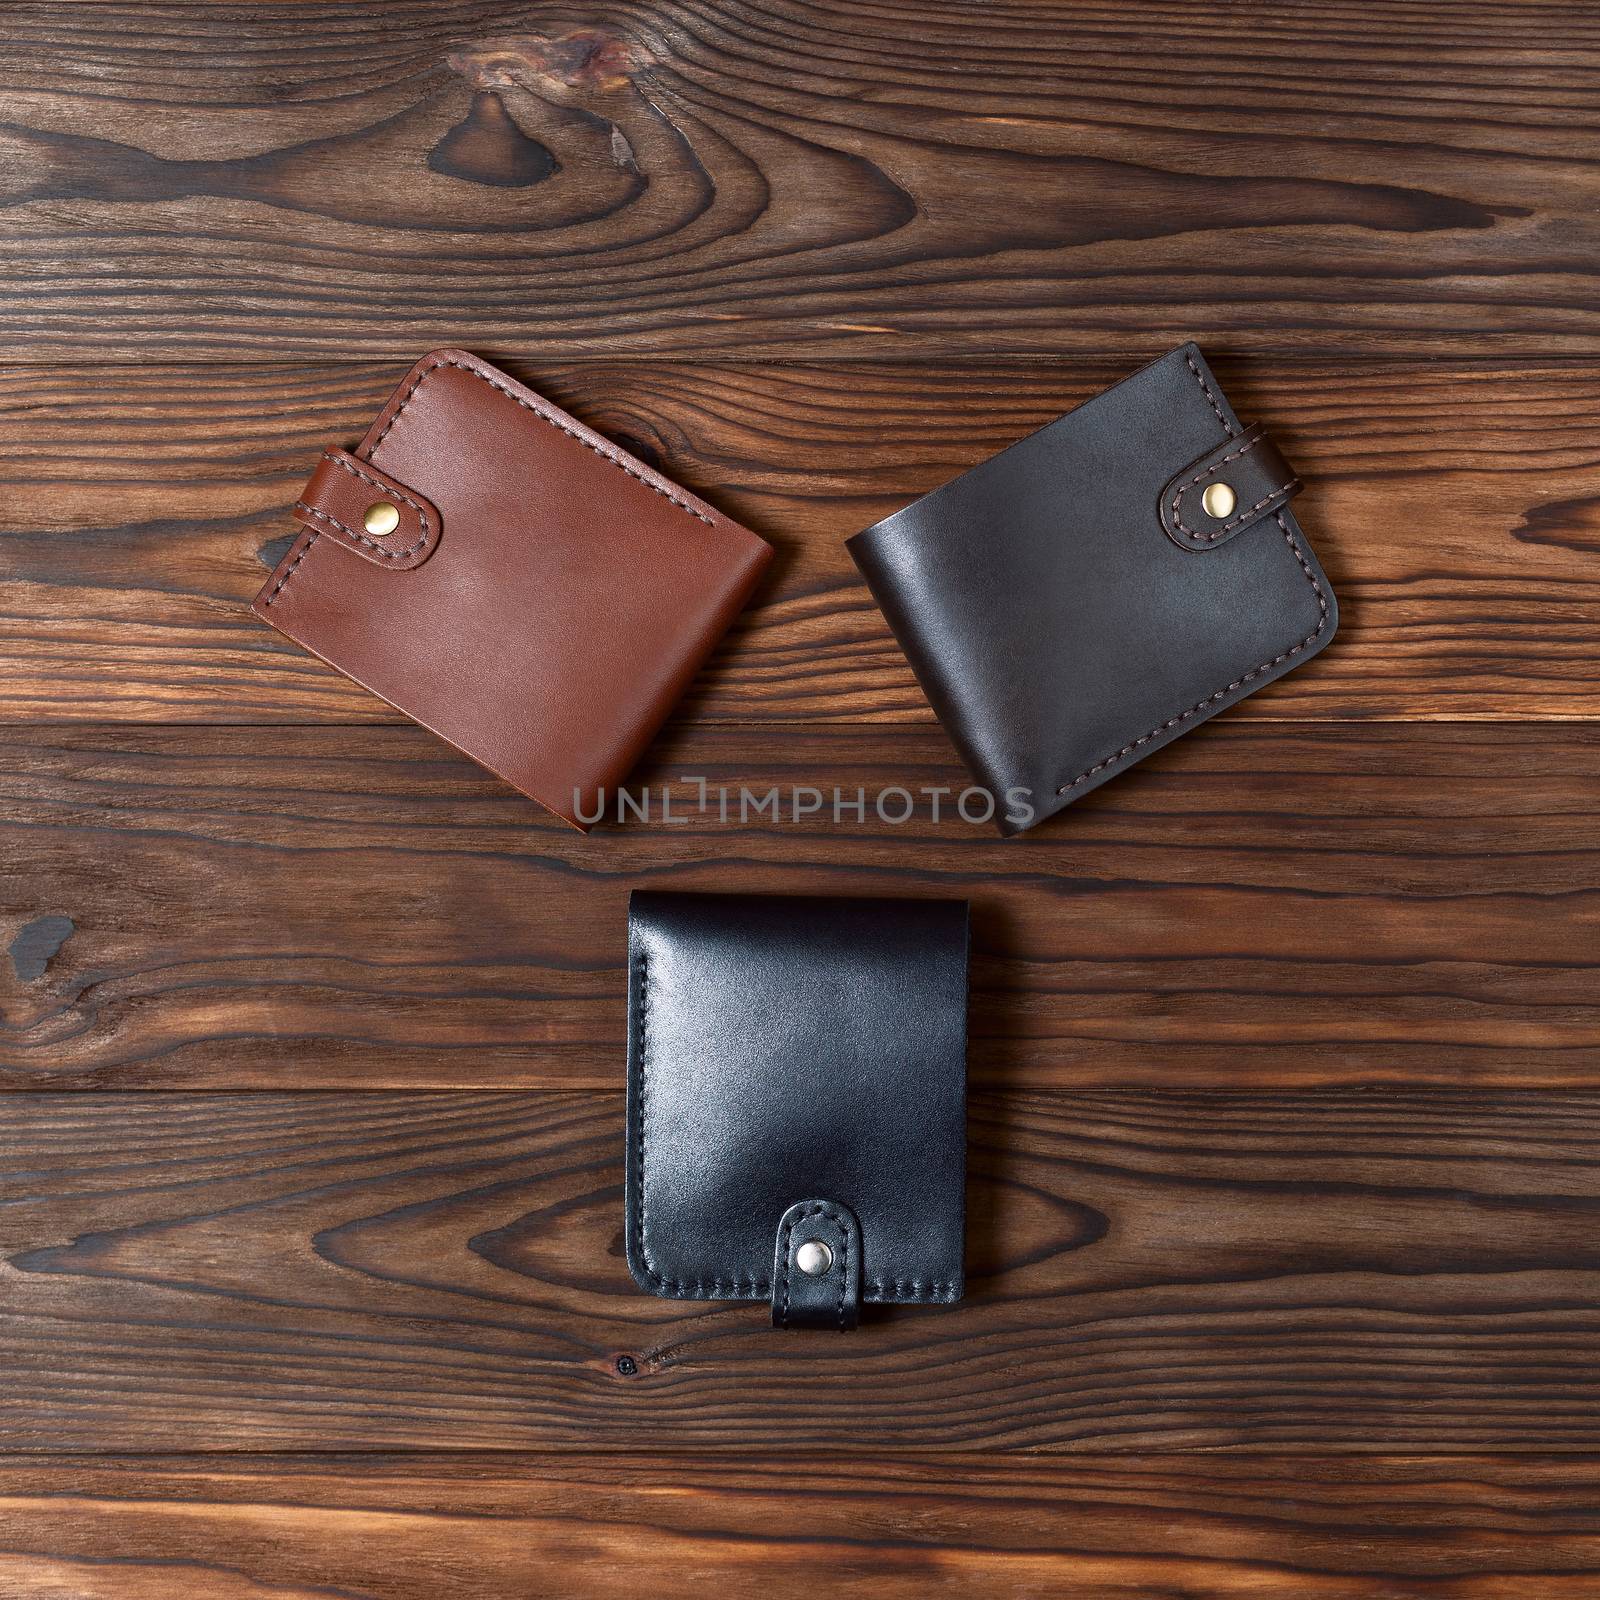 Three handmade leather gloss wallets on wooden textured background. Up to down view. Businessman wallet stock photo. by alexsdriver